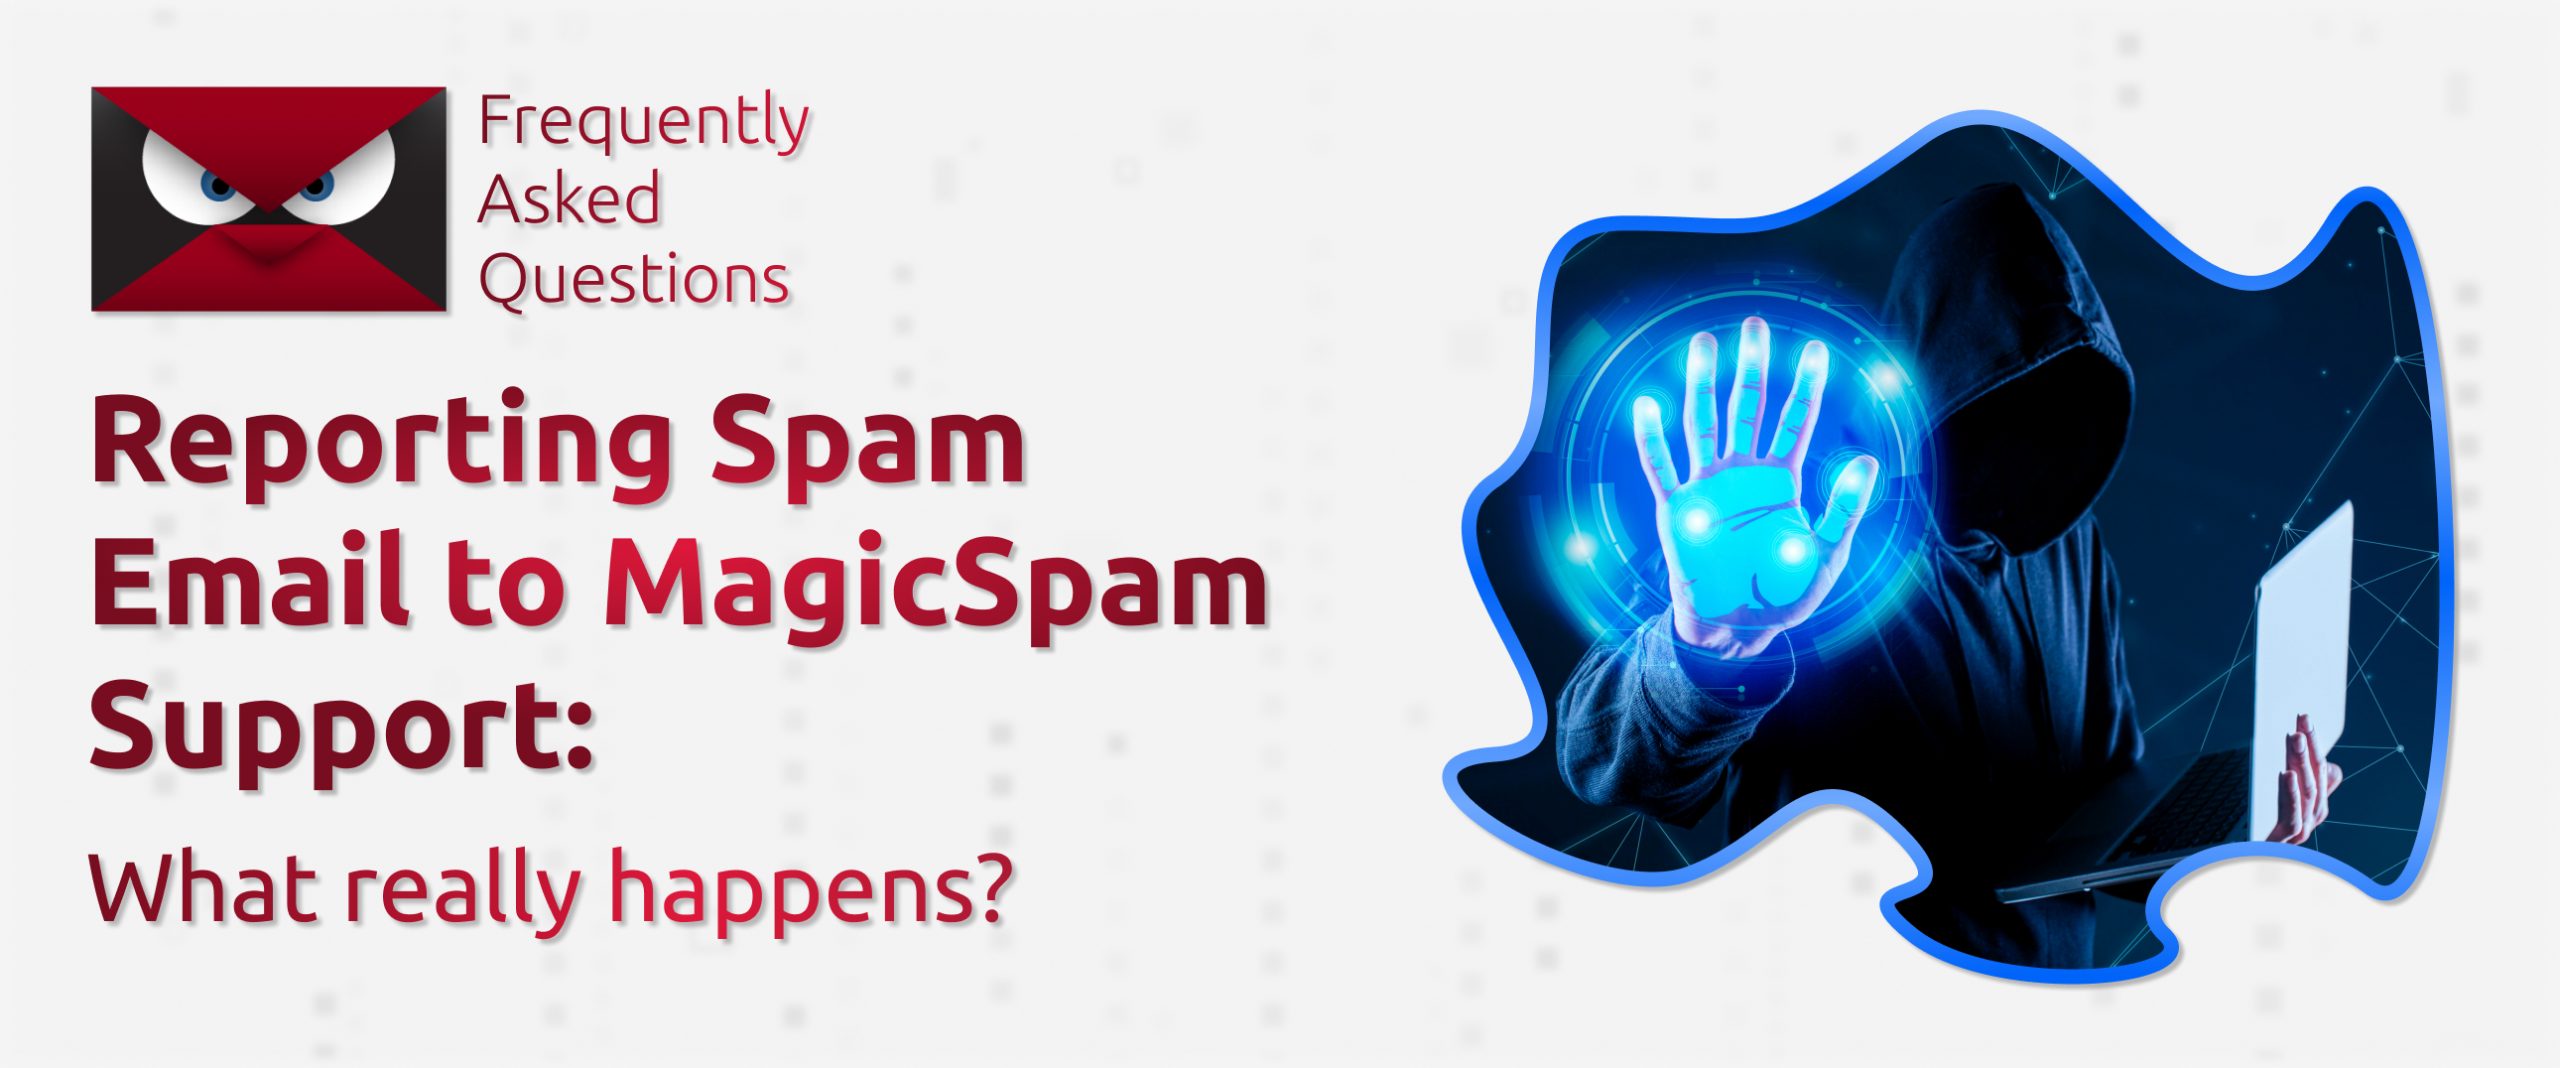 Reporting Spam Email to MagicSpam Support: What really happens?